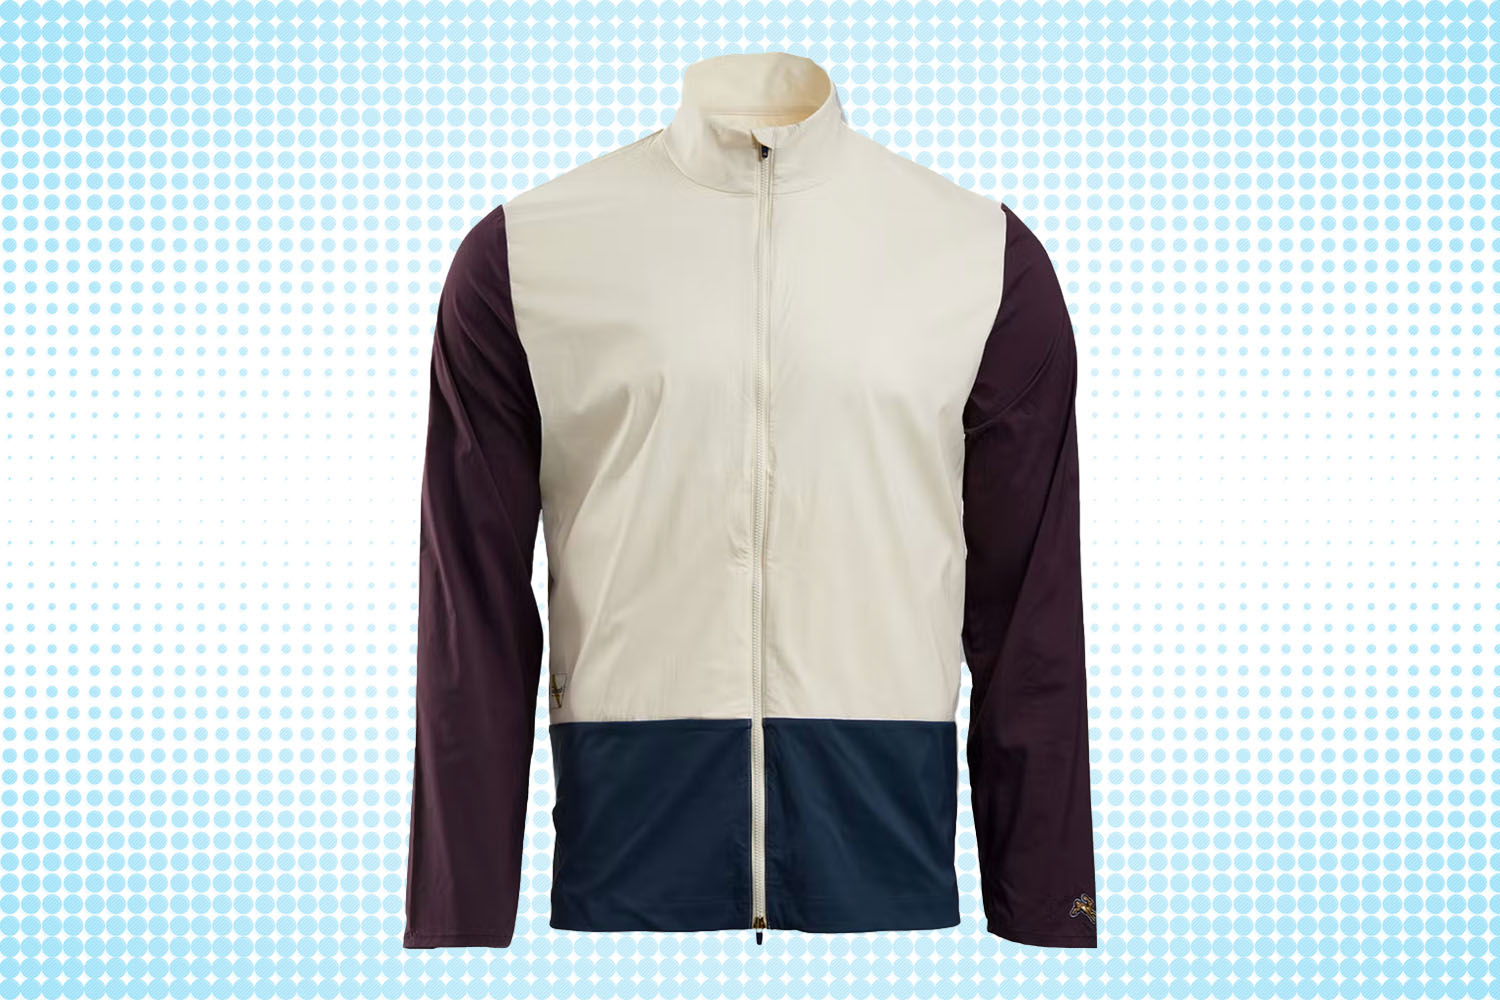 a tri-colored zip-up track jacket from Tracksmith on a white and blue dotted background